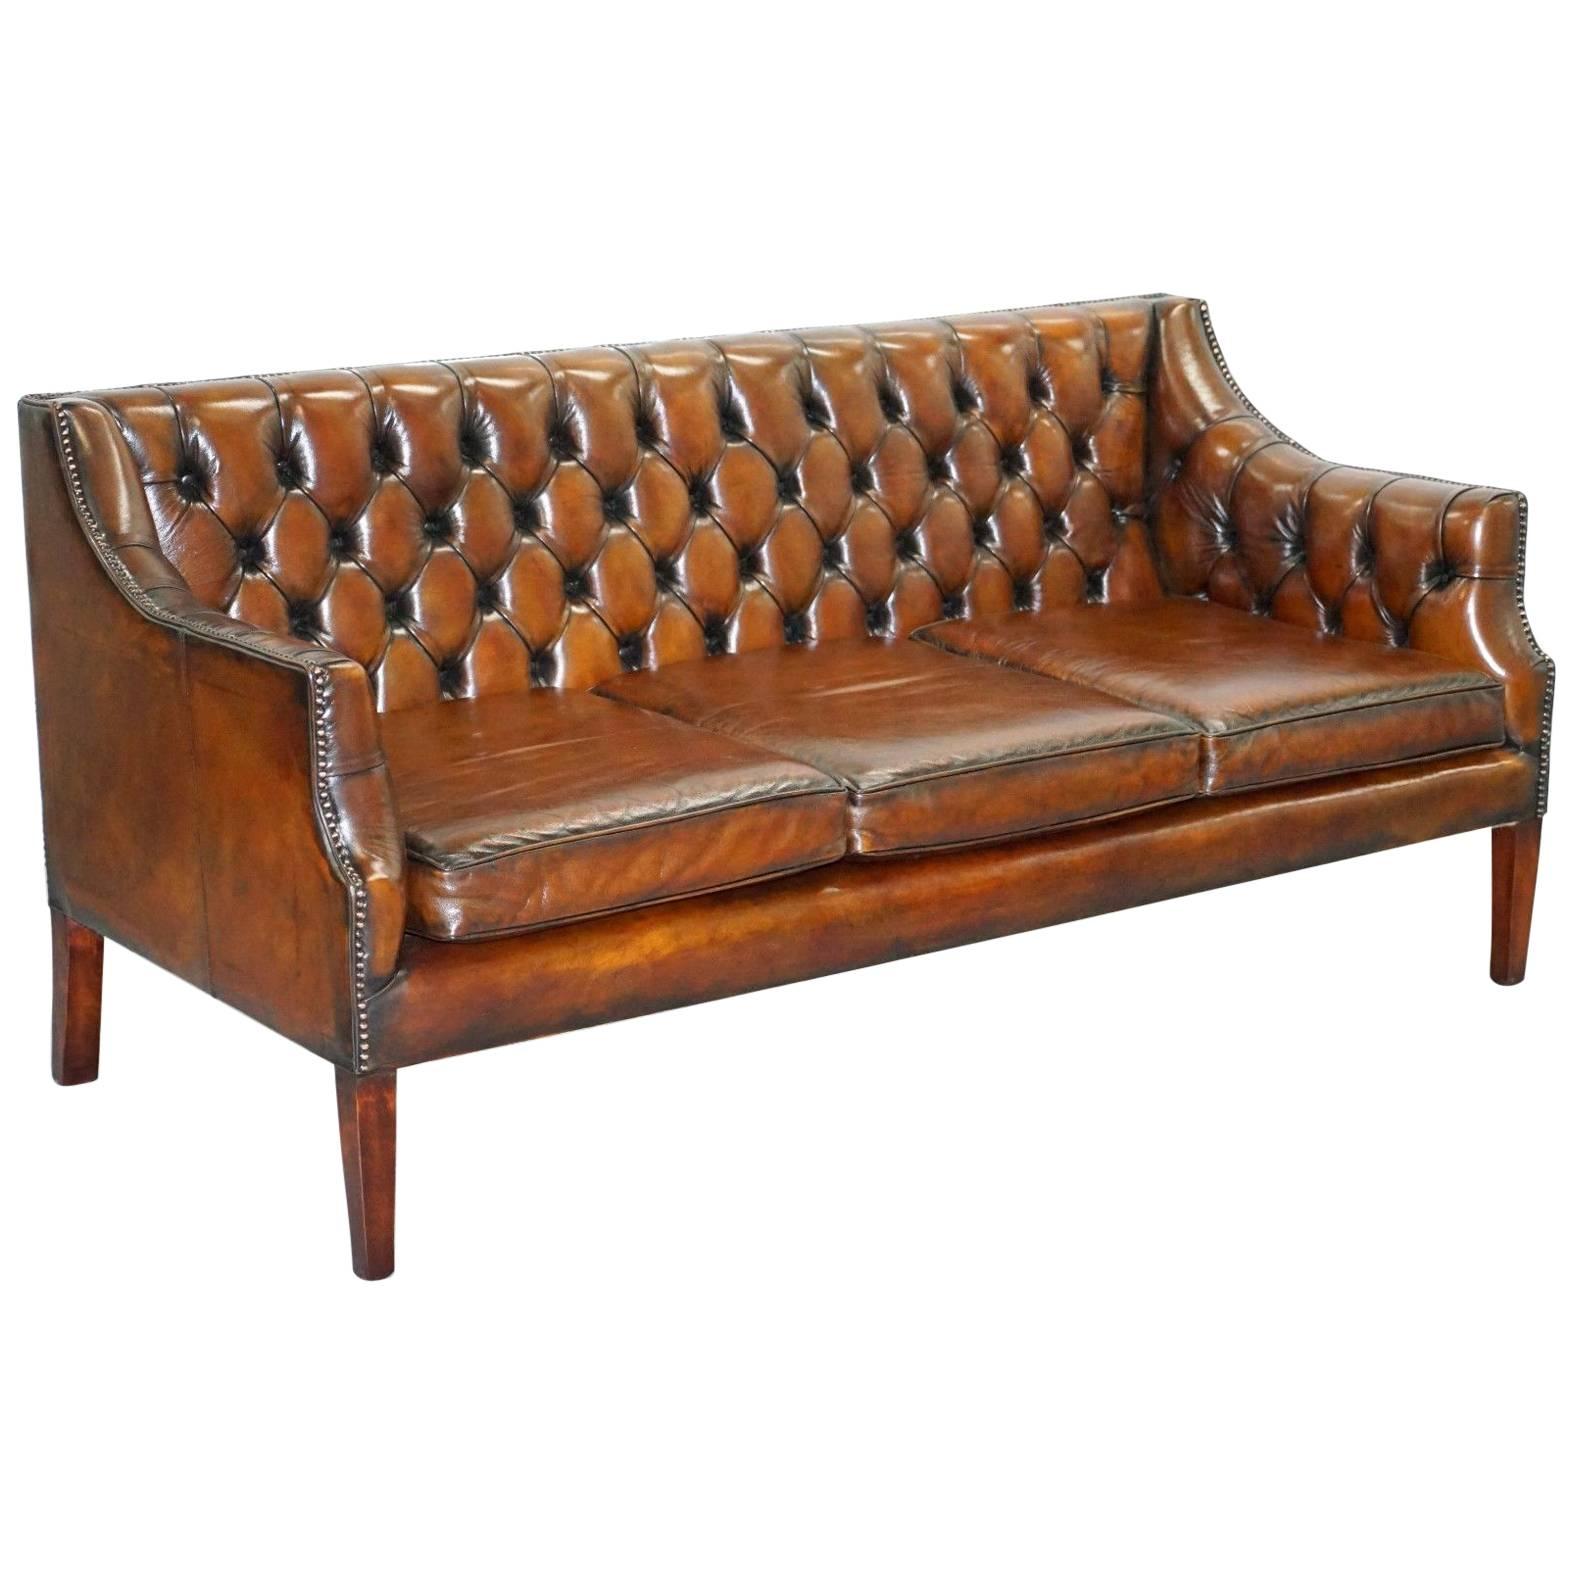 New George Smith Chesterfield Brown Leather Sofa Armchairs Available